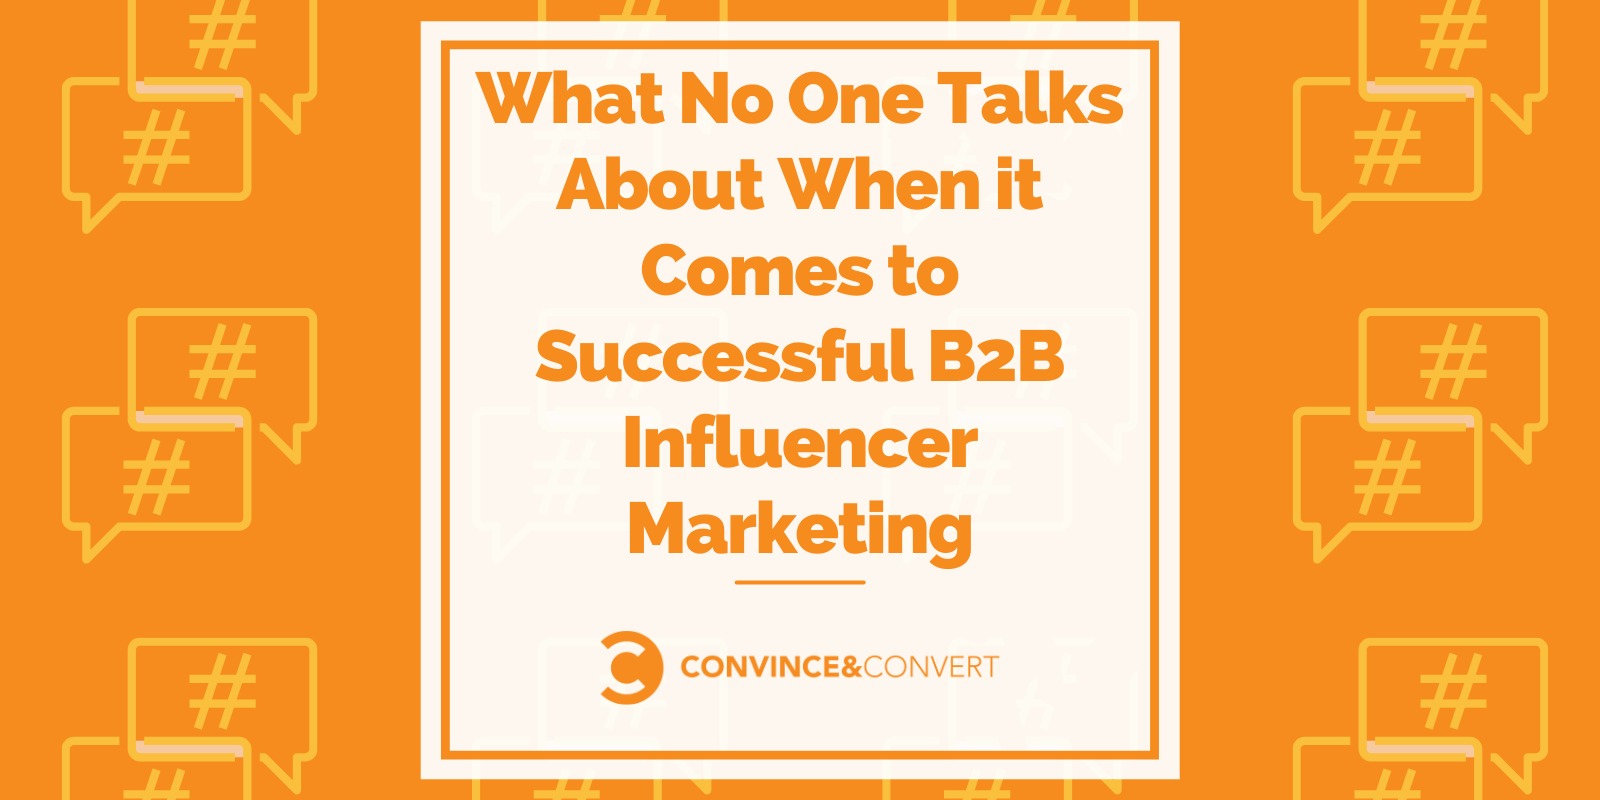 You are currently viewing What No One Talks About When it Comes to Successful B2B Influencer Marketing